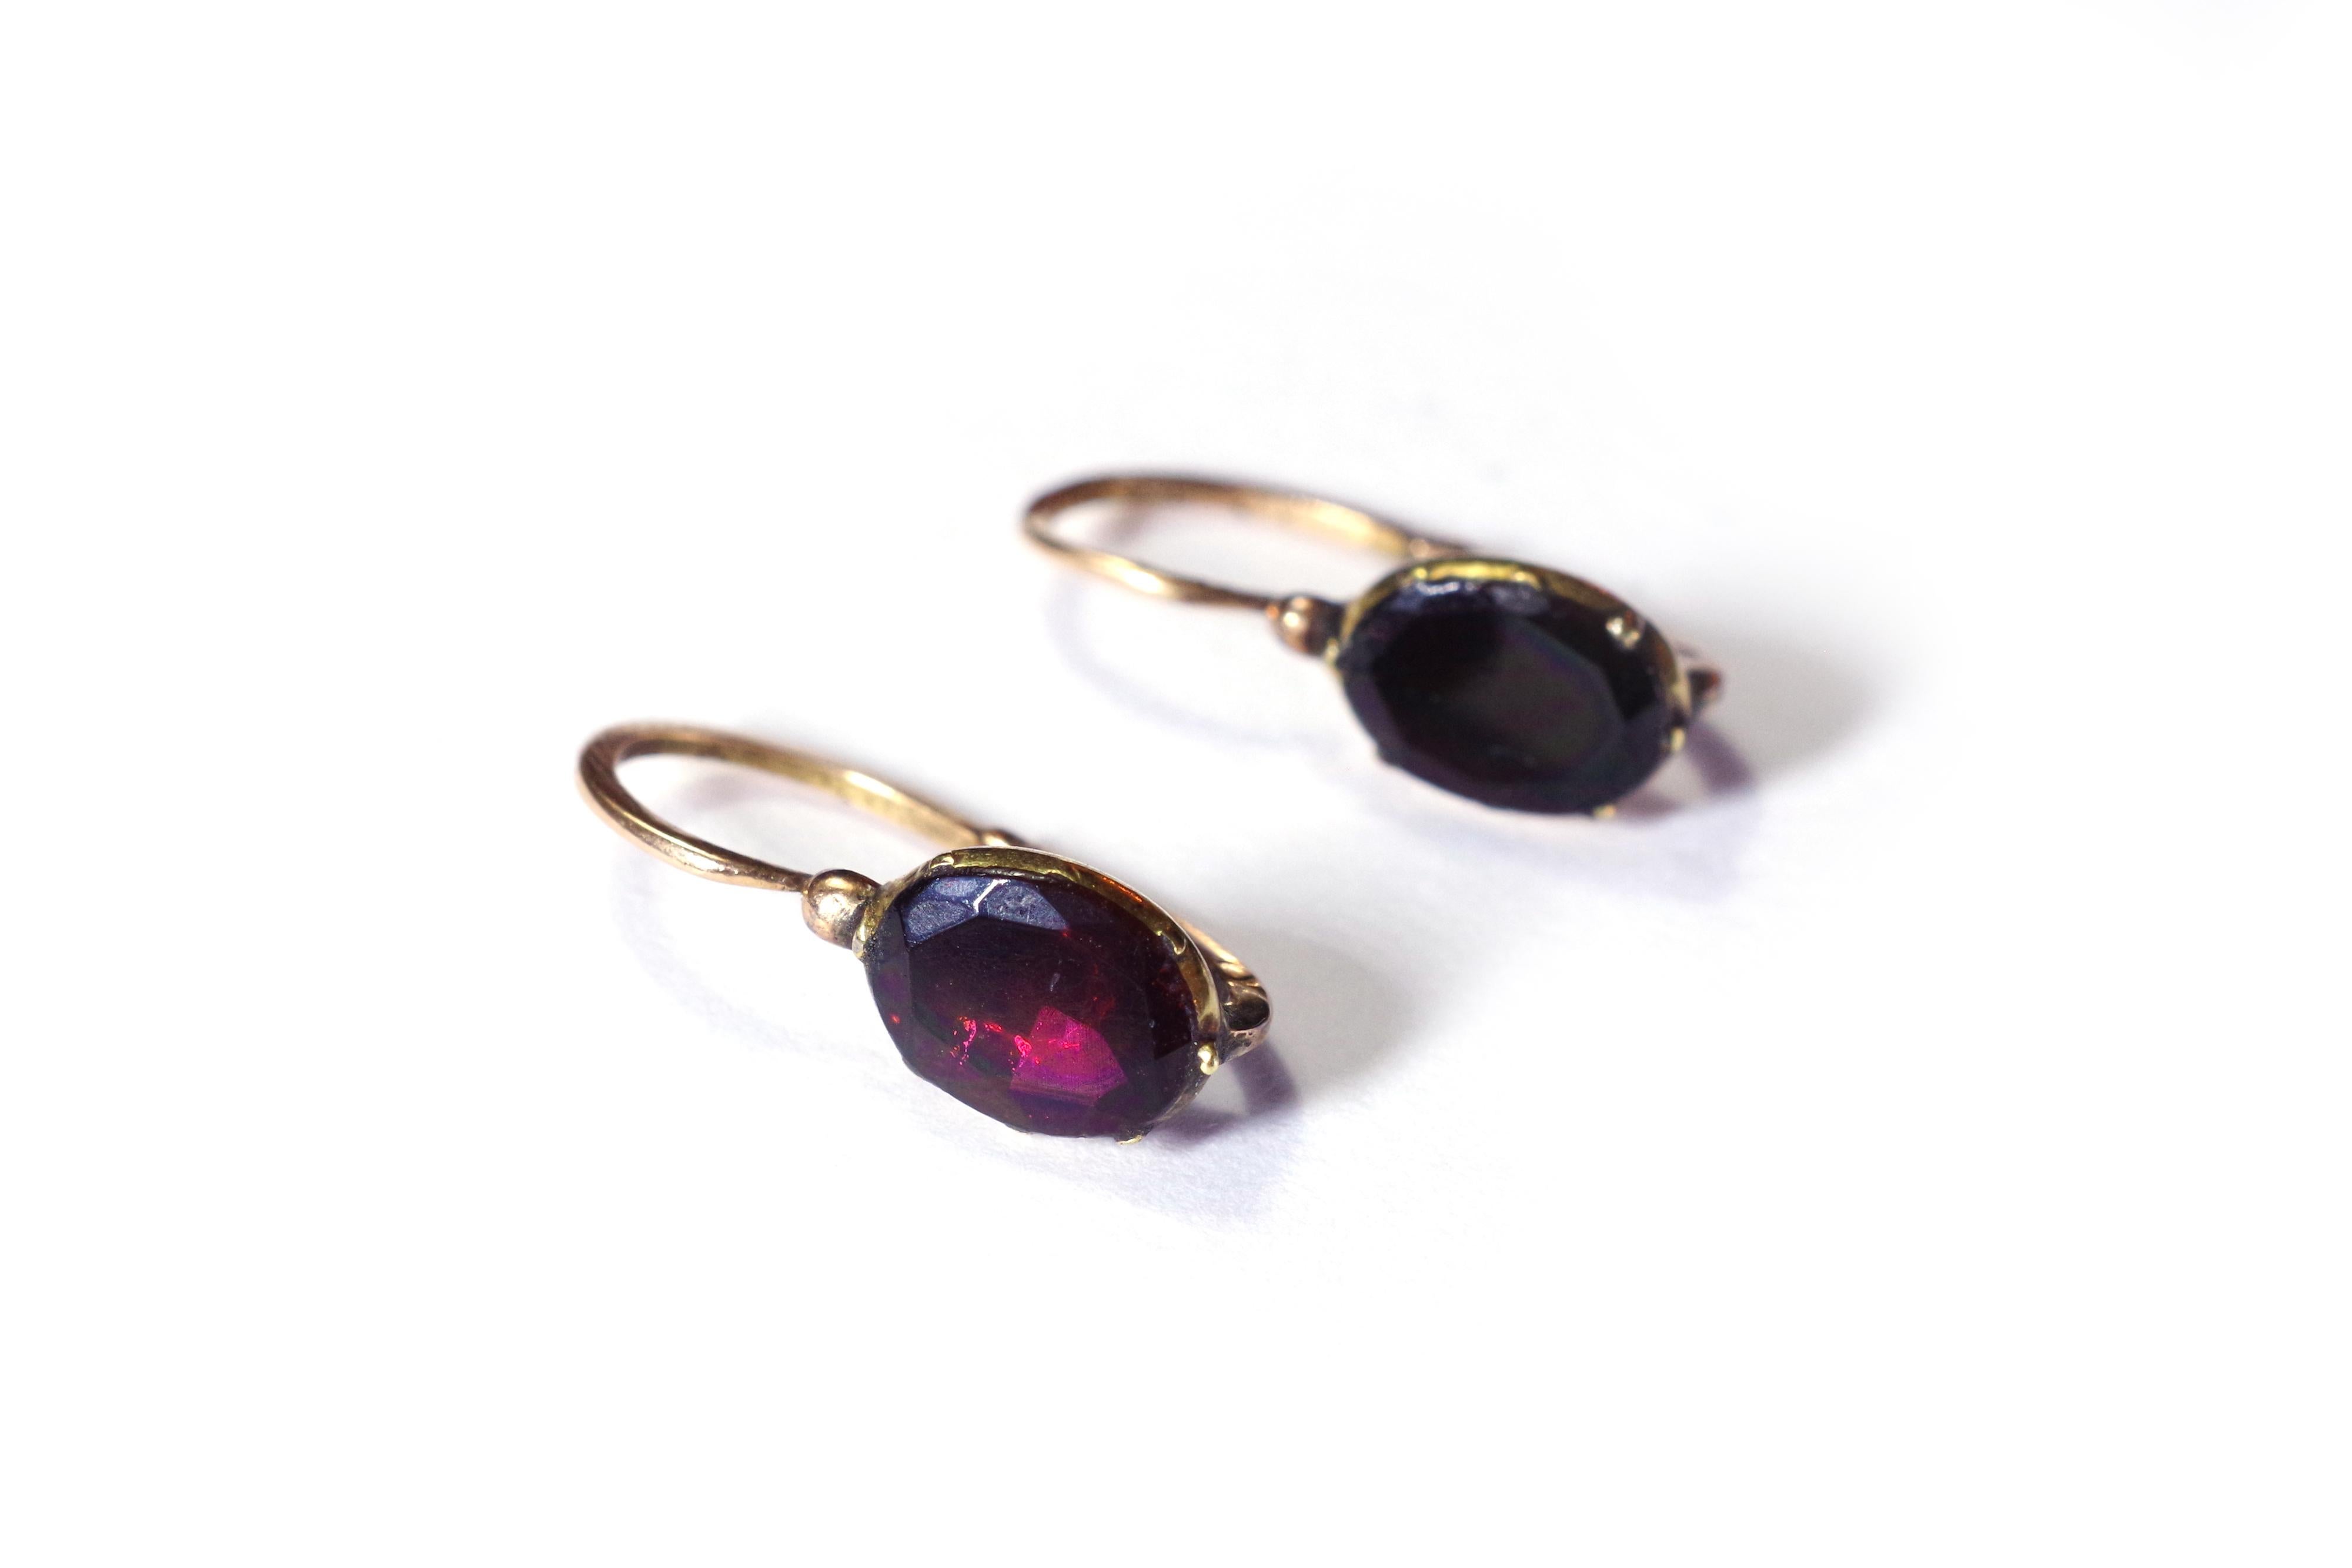 Antique Georgian earrings garnets in rose gold 18 karats. These earrings are set with dark red garnets on foils. The gems are set in a closed setting, with a domed bottom. The foil is a metallic leaf that enhances the brilliance and color of the